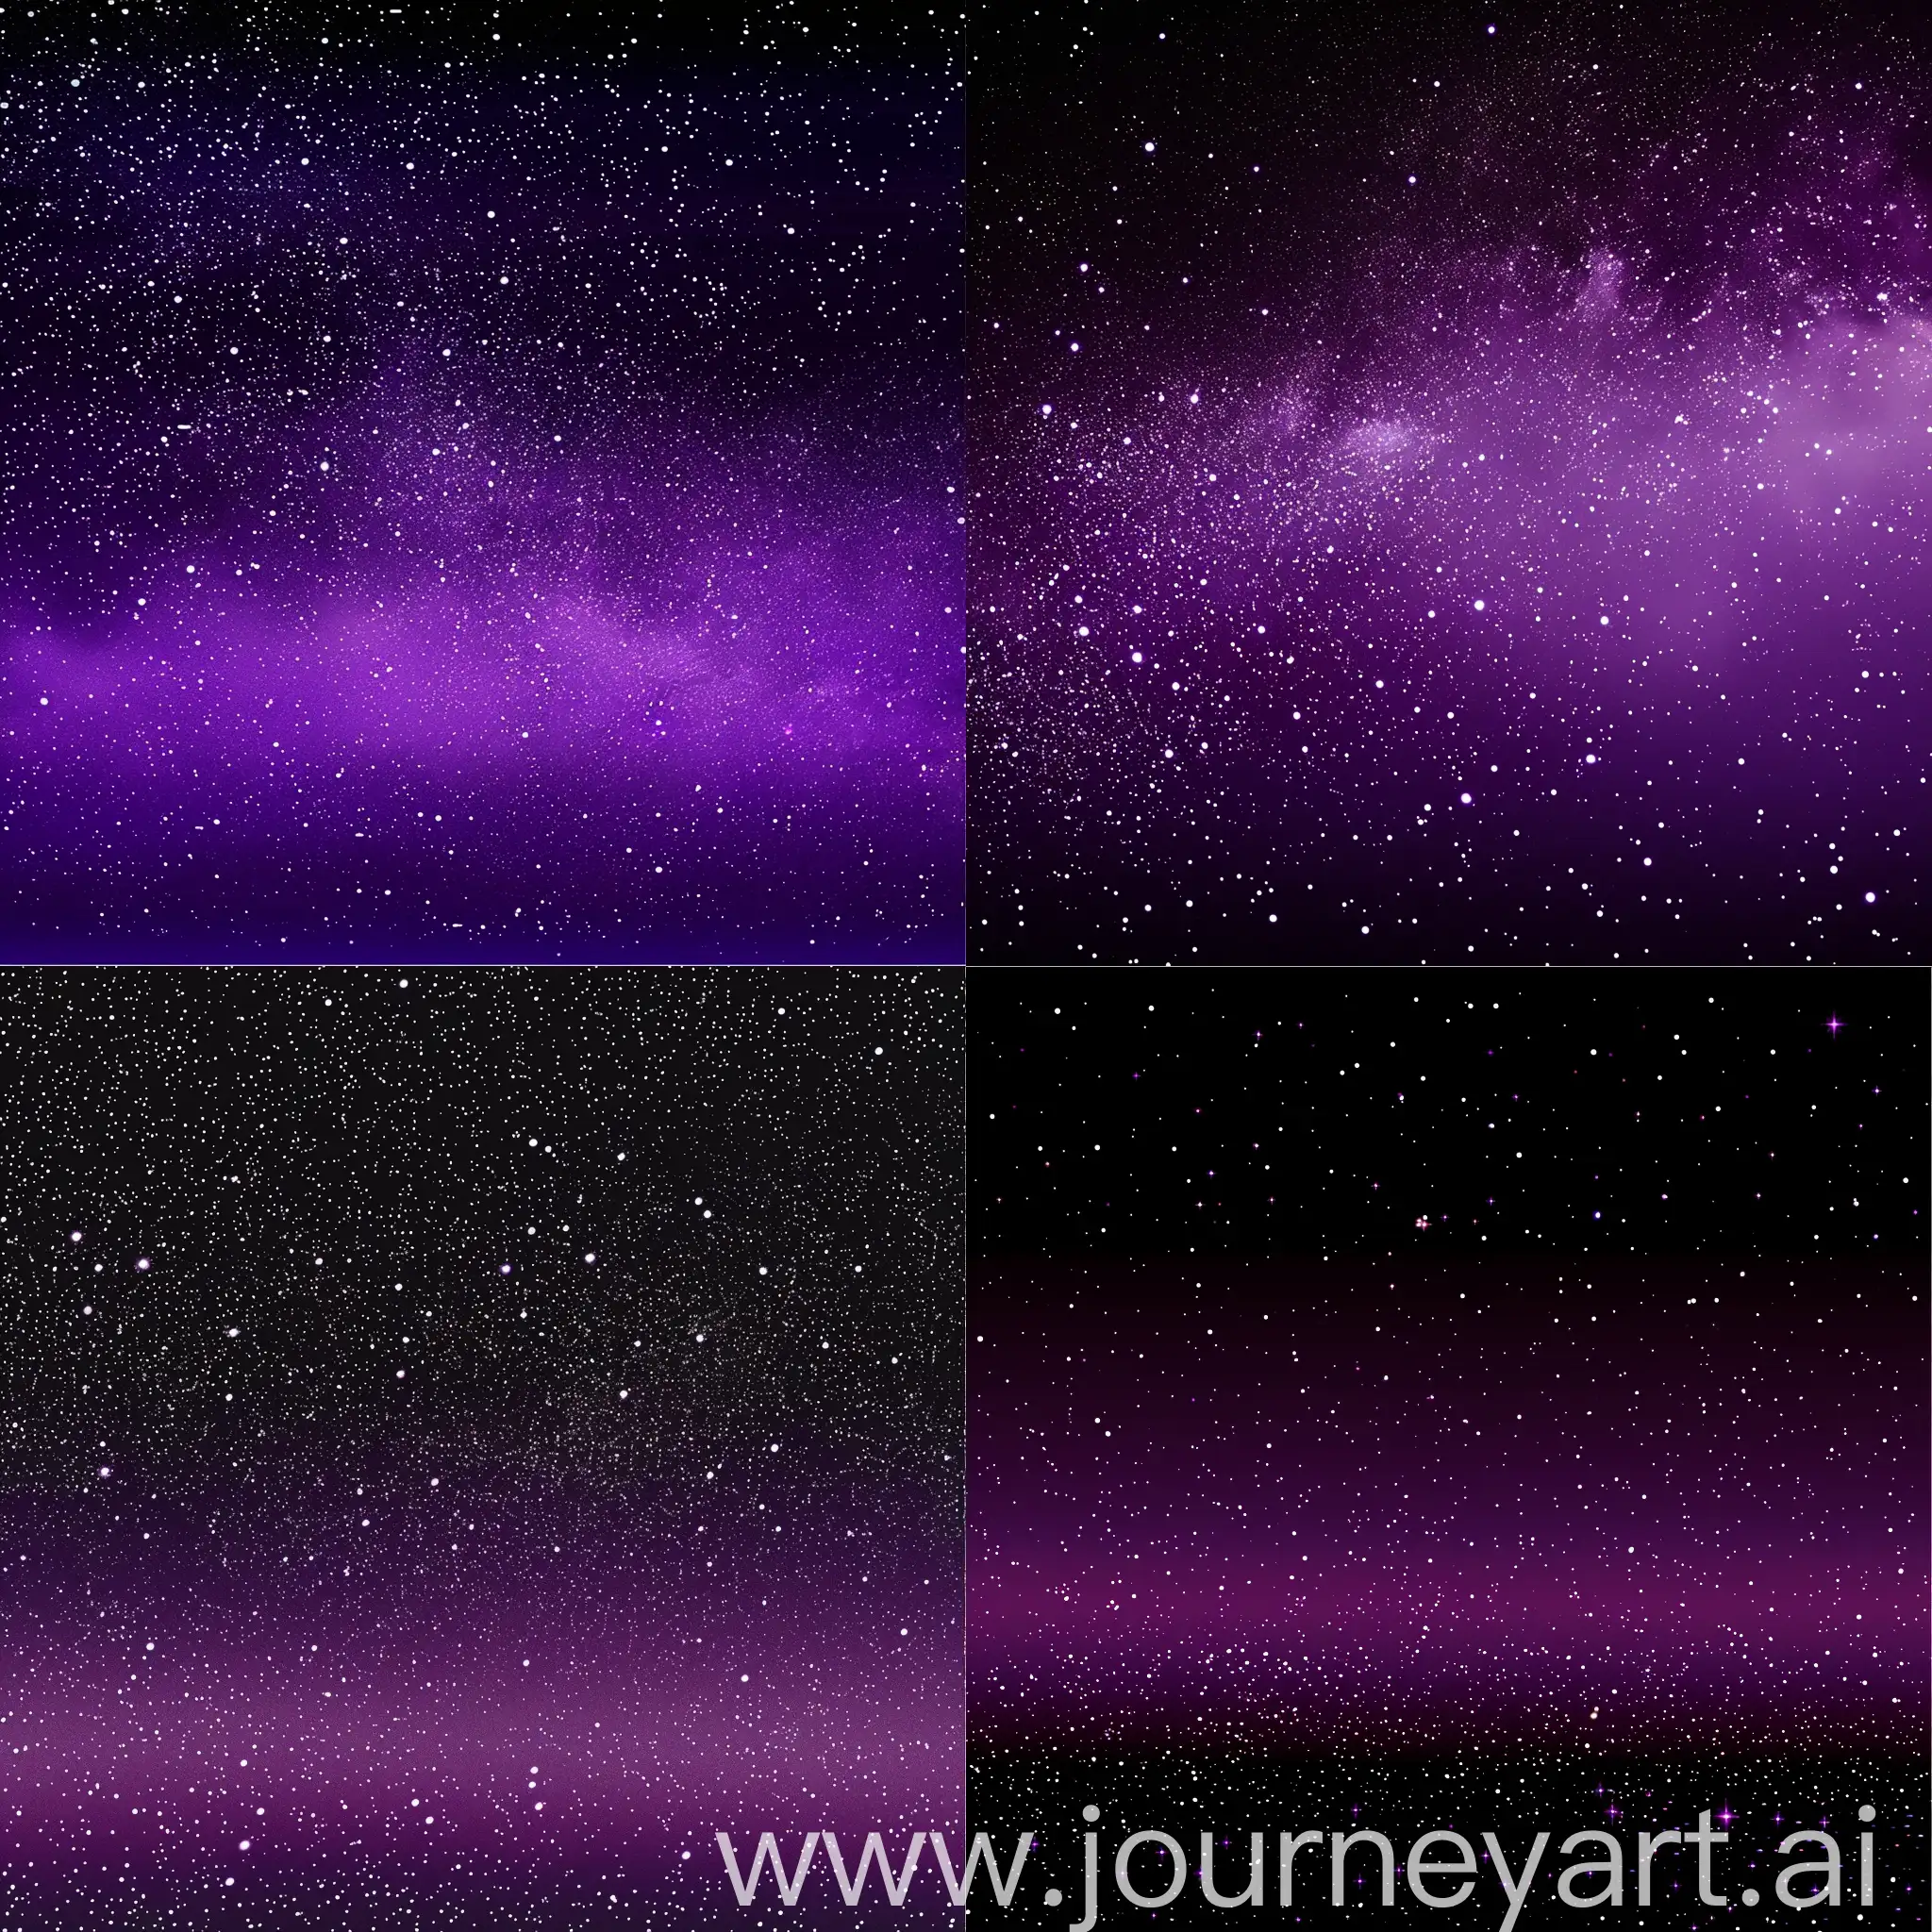 The background is a starry sky in a purple gradient from black to dark purple